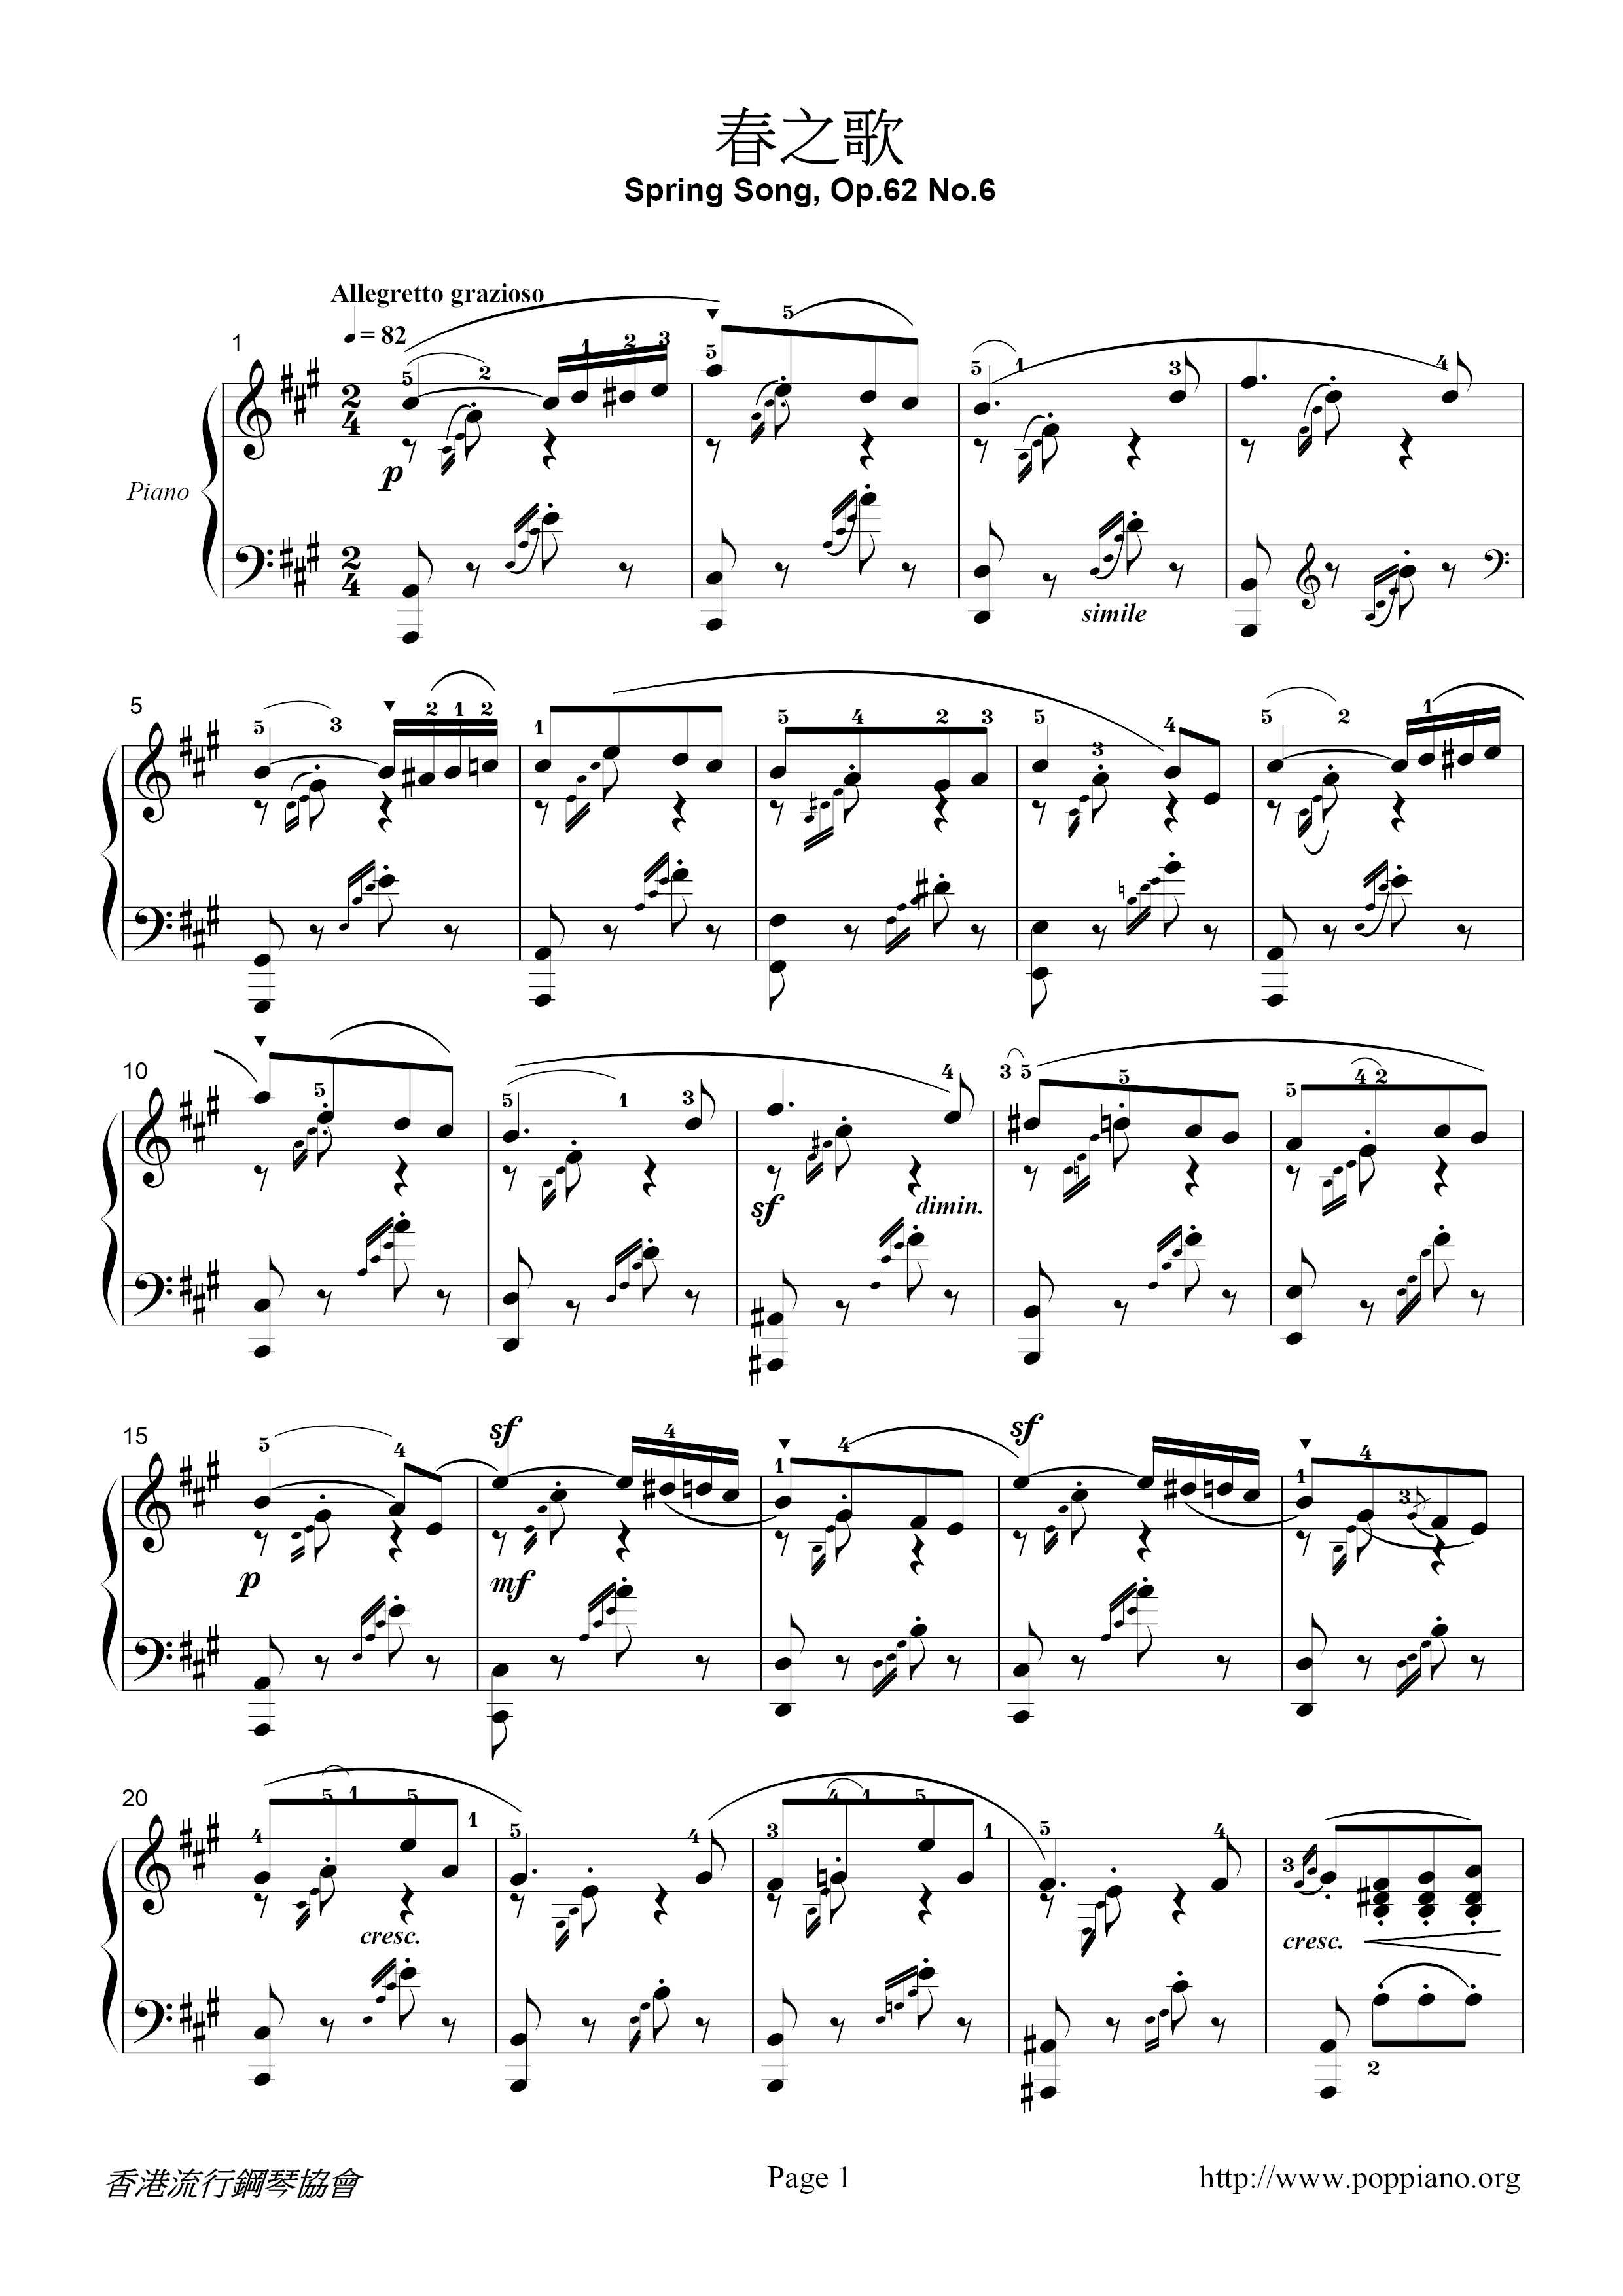 Song Without Words, Op.62 No.6 春之歌 Score